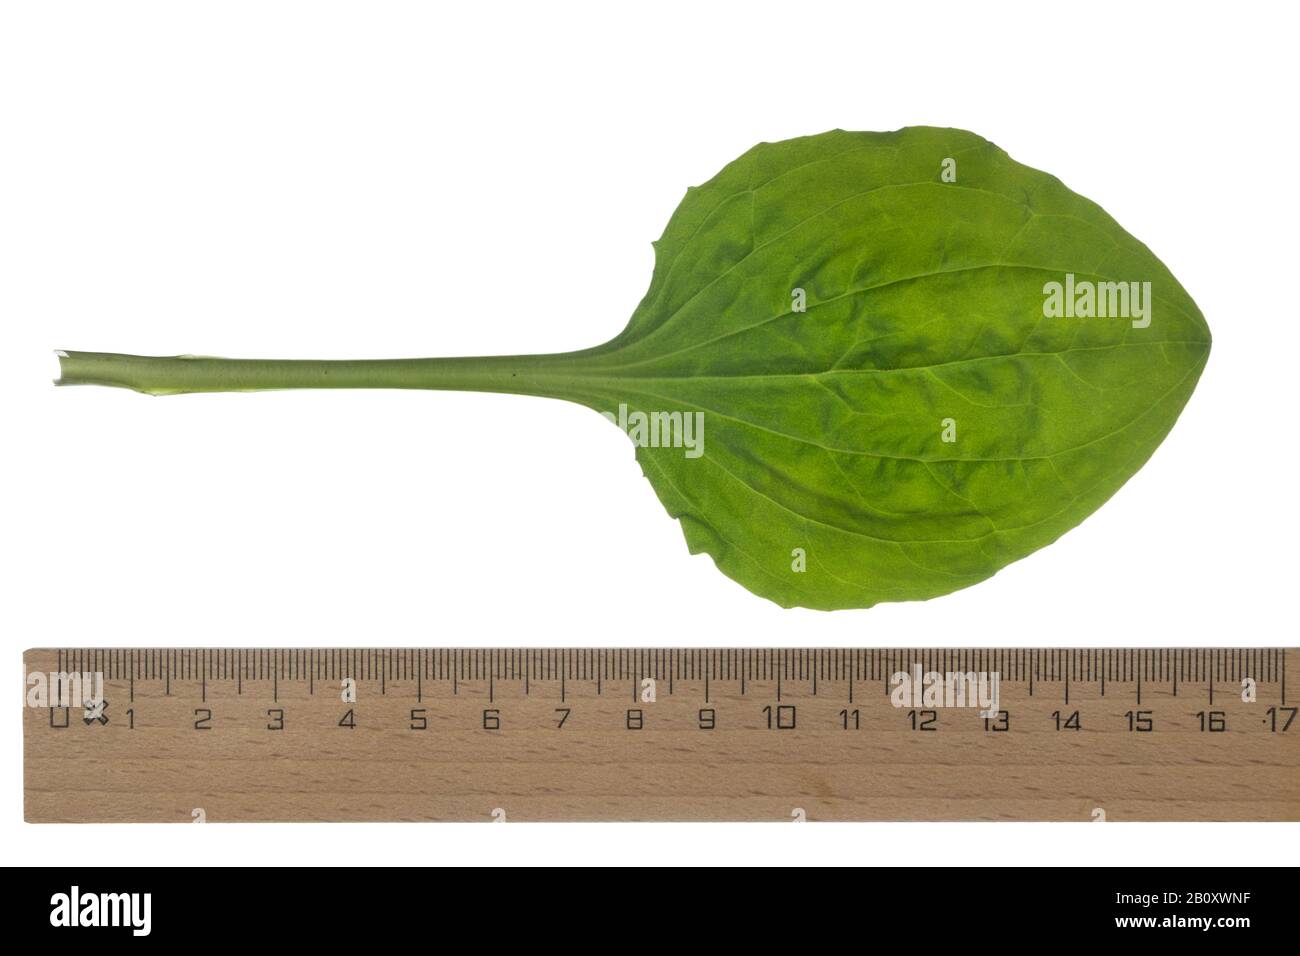 common plantain, great plantain, broadleaf plantain, nipple-seed plantain (Plantago major), leaf, cutout with ruler, Germany Stock Photo